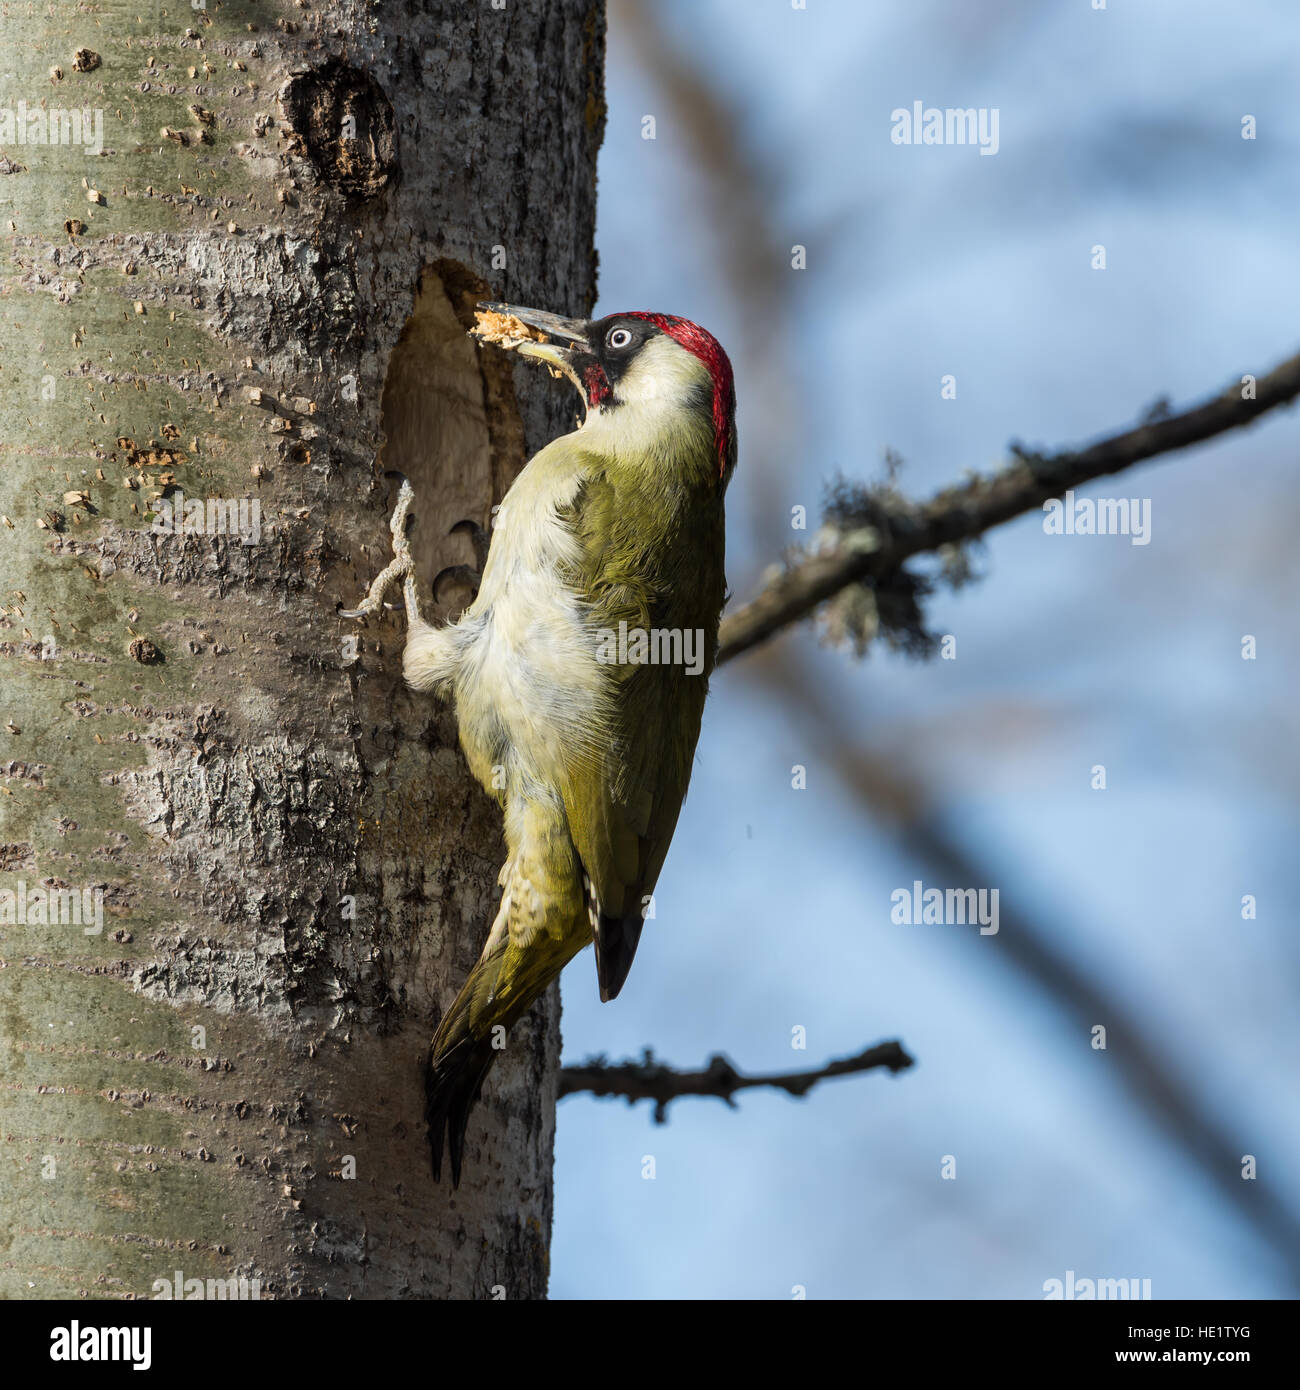 European green woodpecker (Picus viridis) with wood in the beak during excavation of  a nest hole in an aspen tree. Stock Photo